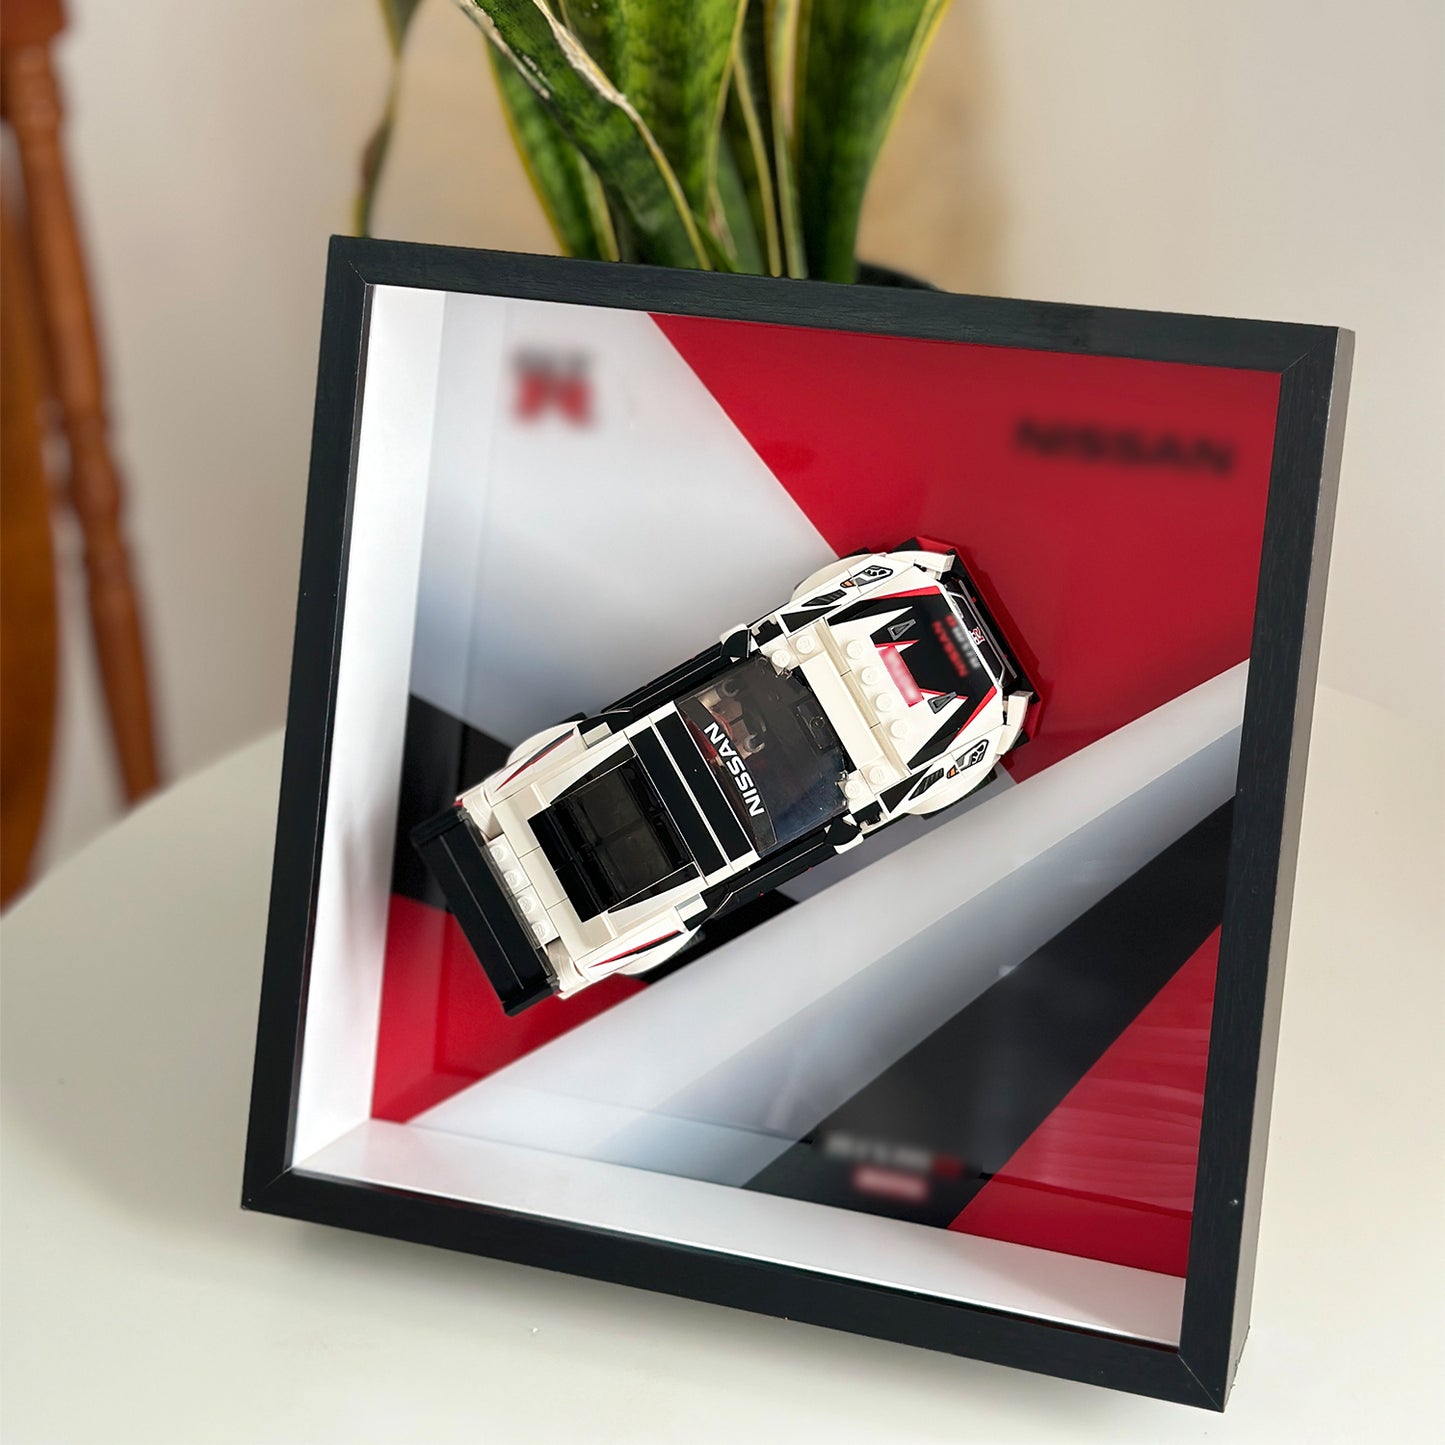 iLuane Display Wallboard for Lego Speed Champions Nissan GT-R NISMO 76896 Building Set, Adult Collectibles Lego Car Wall Mount, Gifts for Lego Lovers(Only Display Wallboard)